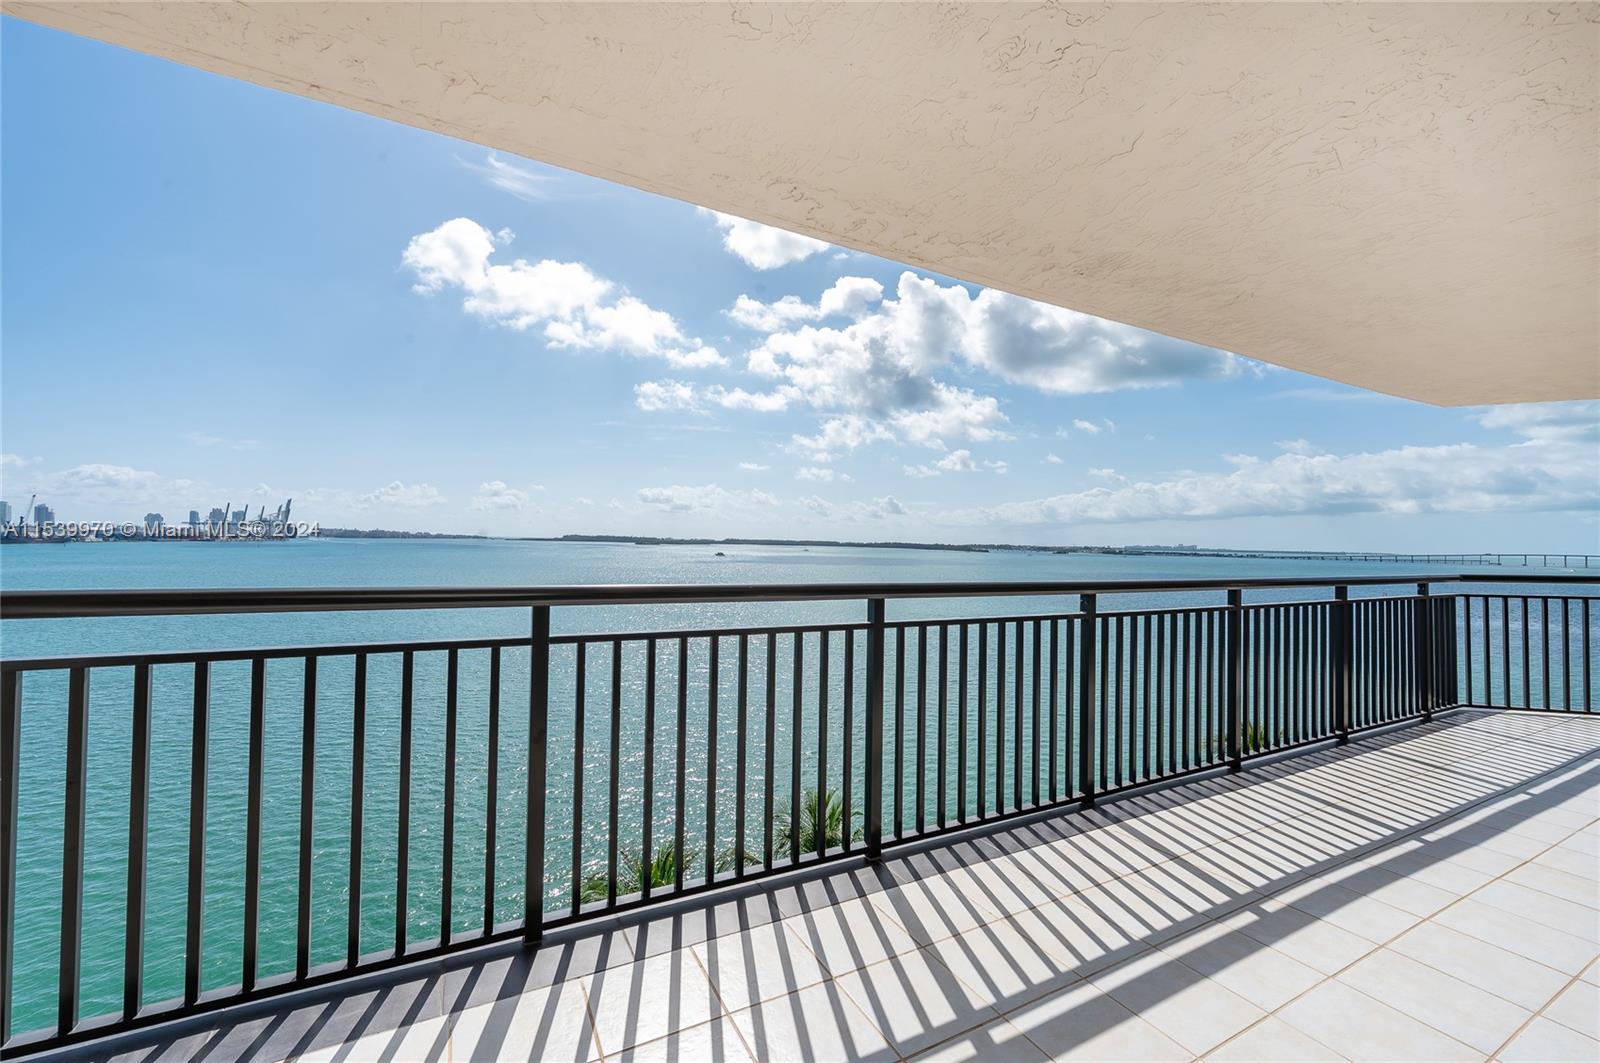 -NEW PICTURES- The most spectacular unobstructed view of Biscayne Bay from this corner unit, located in the best line of the building. 2 Bed / 2 Bath condo with 1,200 sq.ft.  Lots of Potential!! Recently painted, 2 ASSIGNED Parking Spaces, a spacious balcony, and Bay views from every room. Enjoy Brickell Key and its great location with immediate access to central Brickell and Brickell City Center with its excellent shops and restaurants, but Brickell Key offers a more relaxed lifestyle on this island. The building is going through upgrades & renovations, brand-new elevators have been installed, halls are being renovated, and much more. All this will increase the property value.